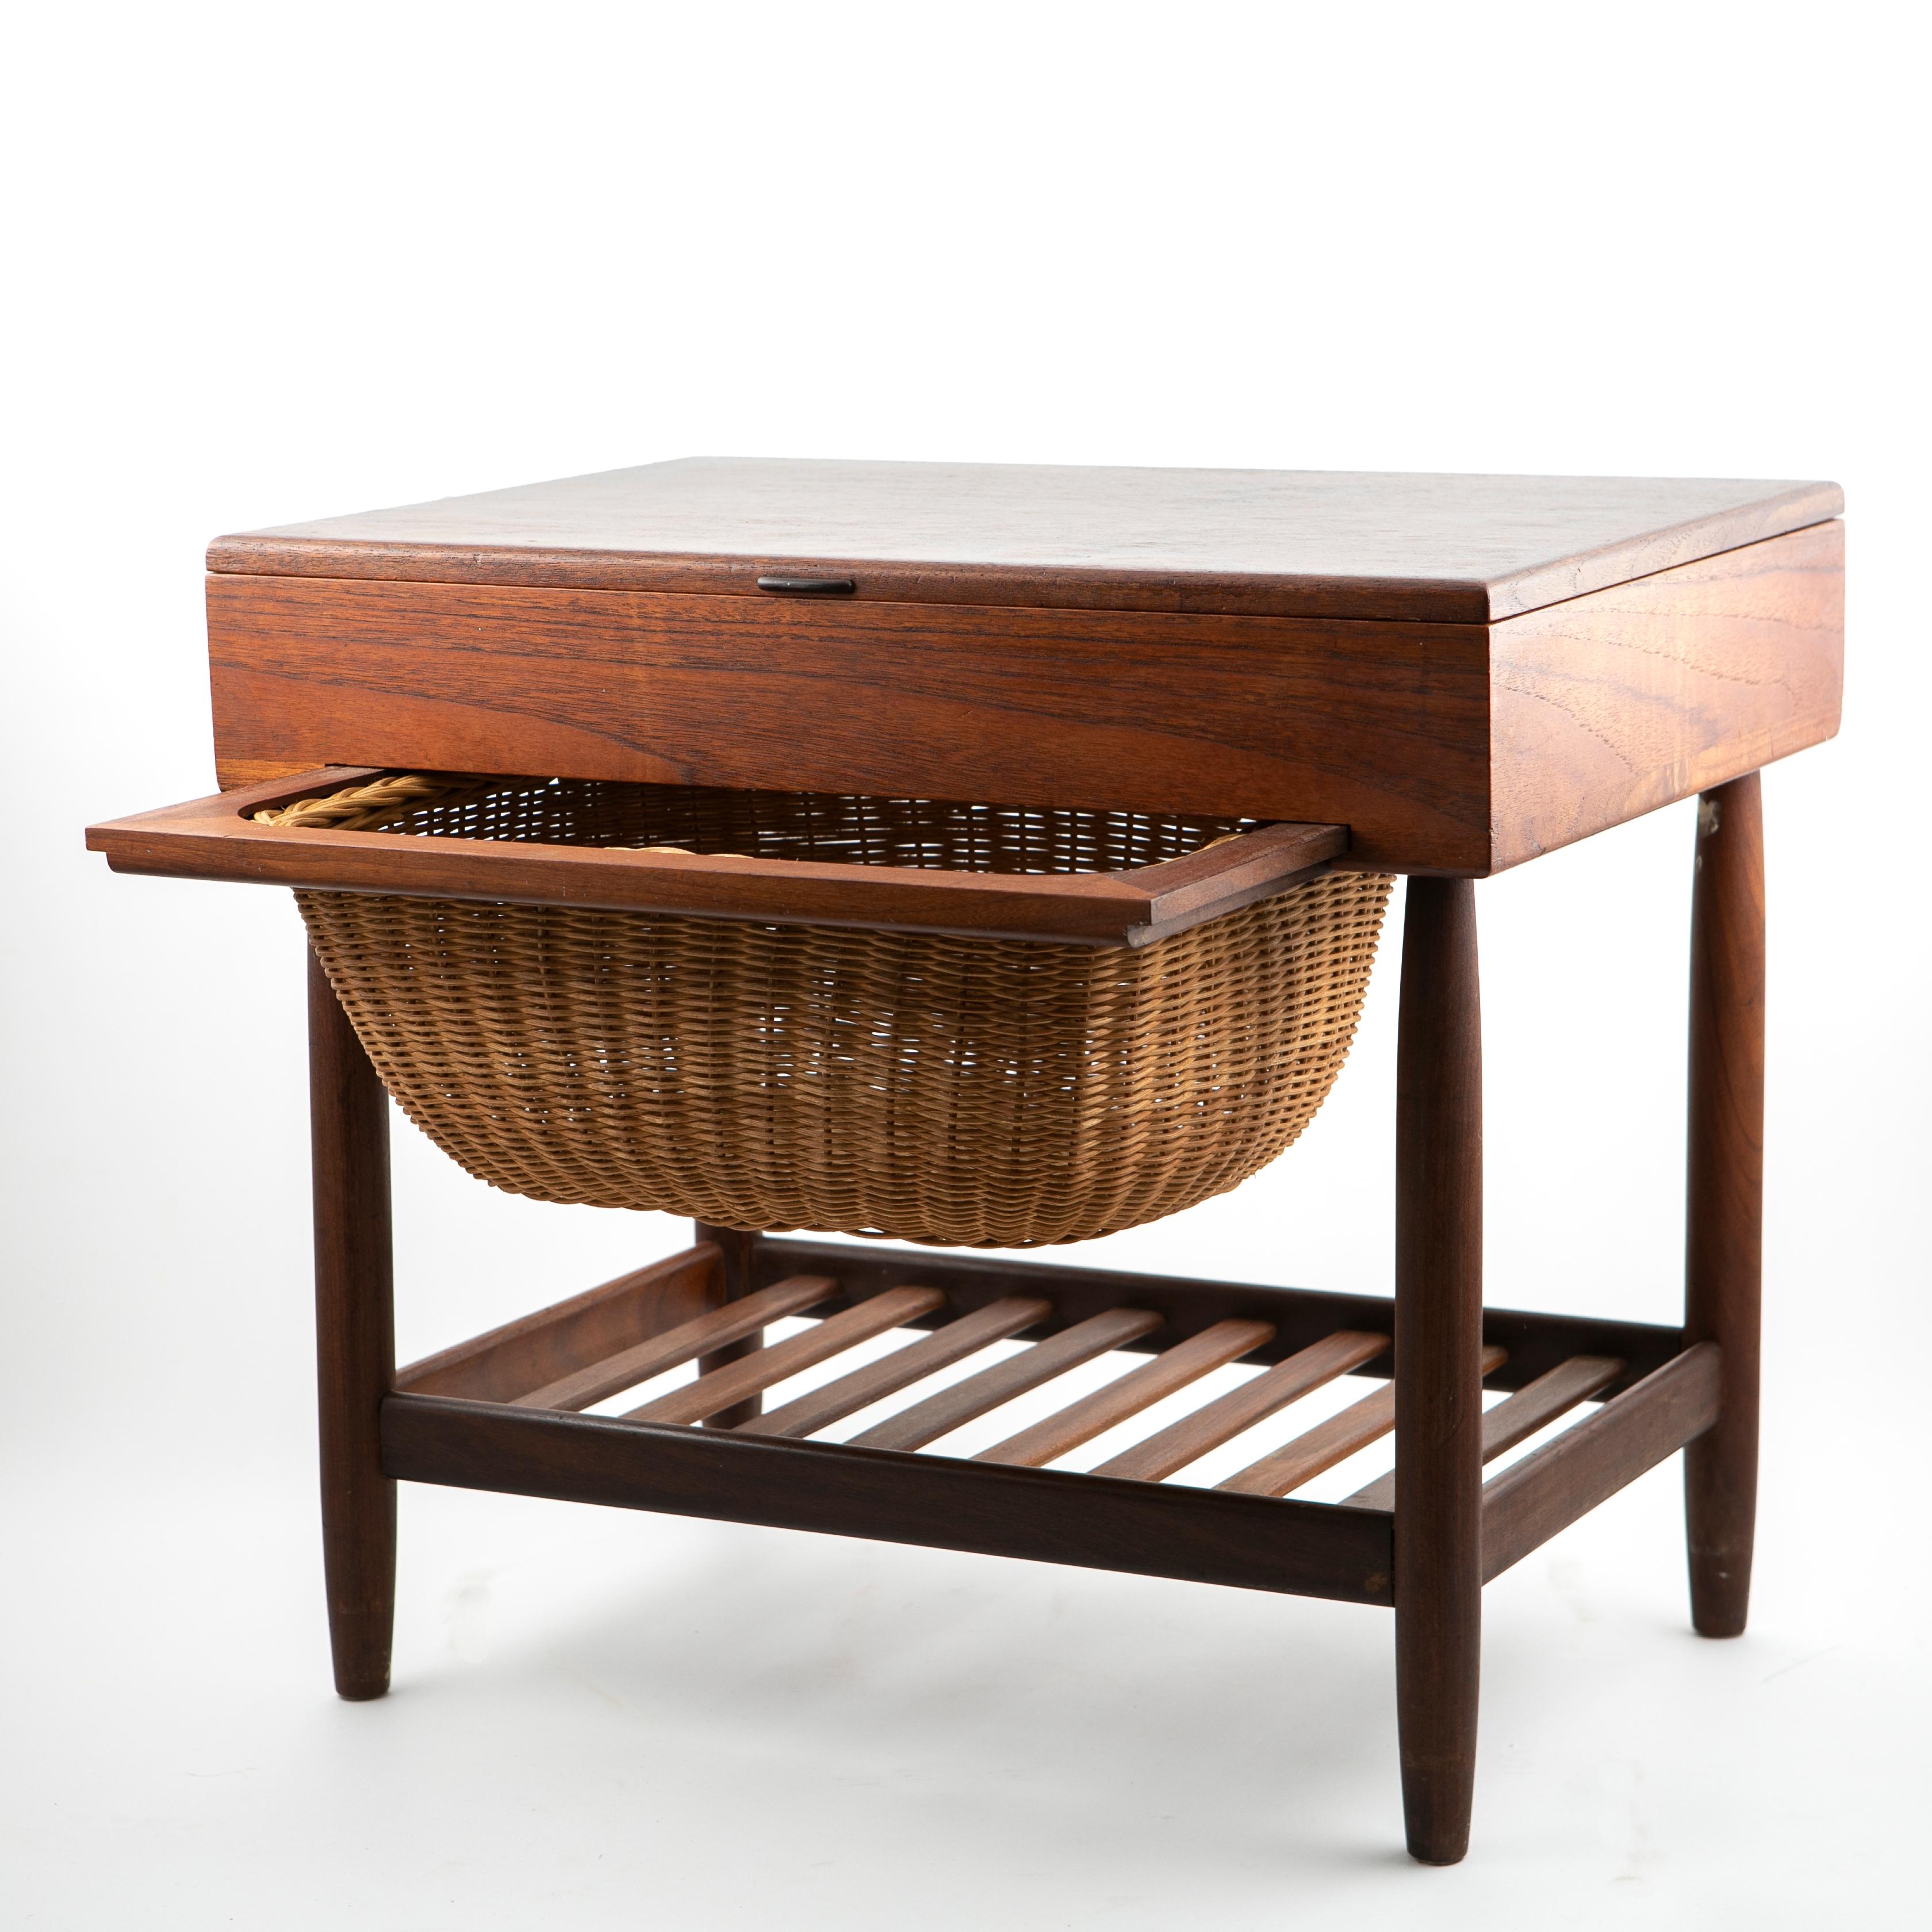 Danish design sewing table / end table
Designed by Ejvind Johansson made in Denmark by FDB Mobler.
Teak vener and maple compartments under a removable wicker basket.

Would also serve well as an end table or night stand.